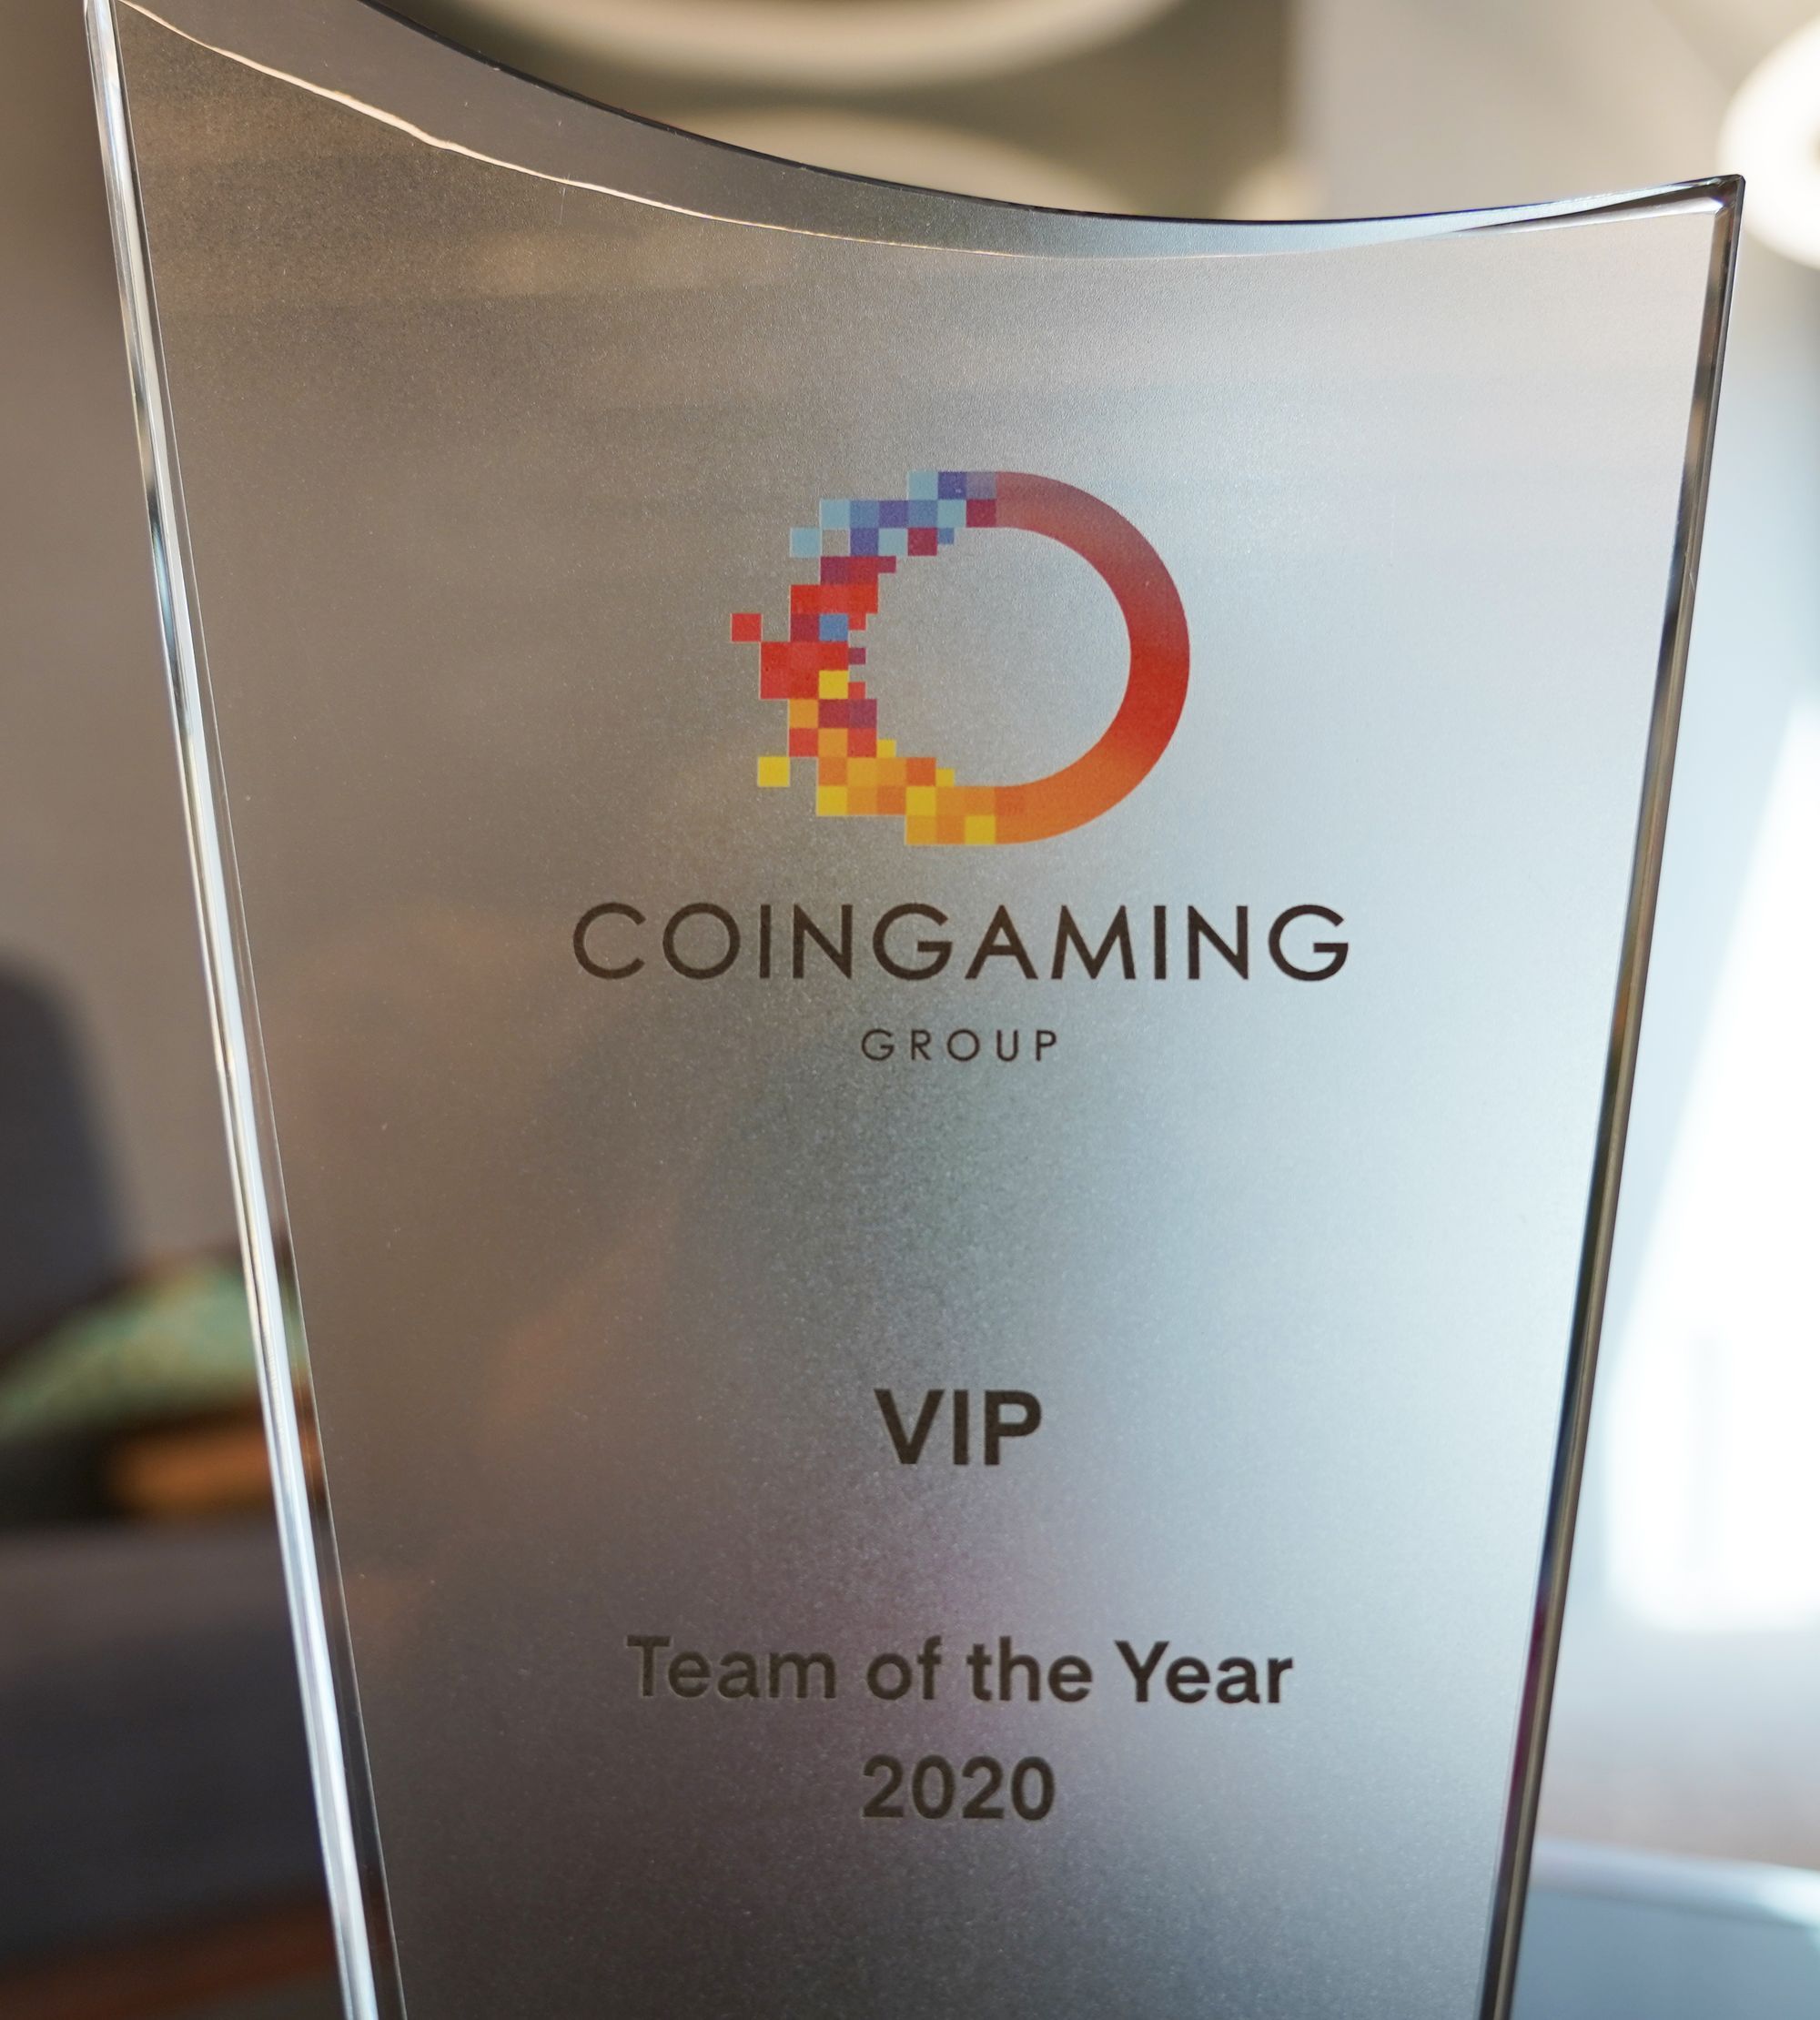 Coingaming Team of the Year 2020 - VIP team